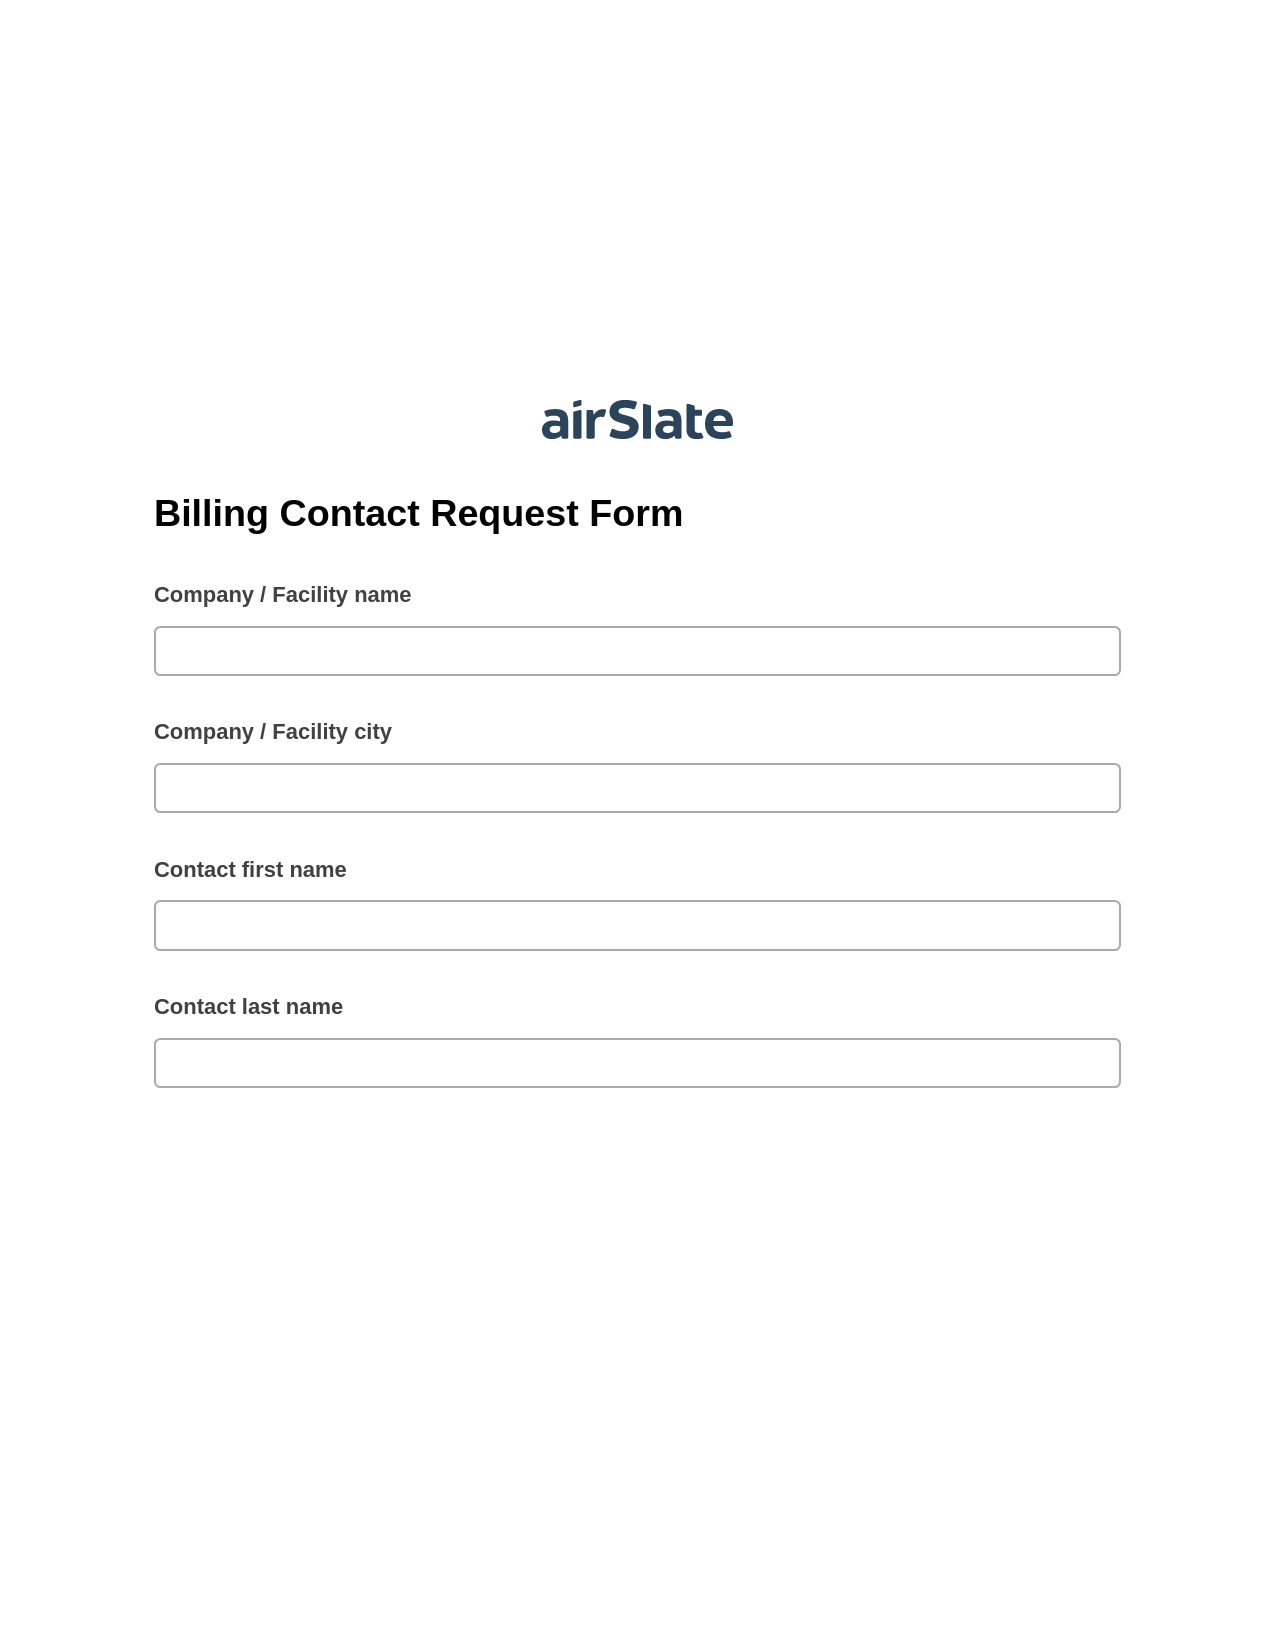 Multirole Billing Contact Request Form Pre-fill Dropdowns from MySQL Bot, Create slate addon, Archive to SharePoint Folder Bot